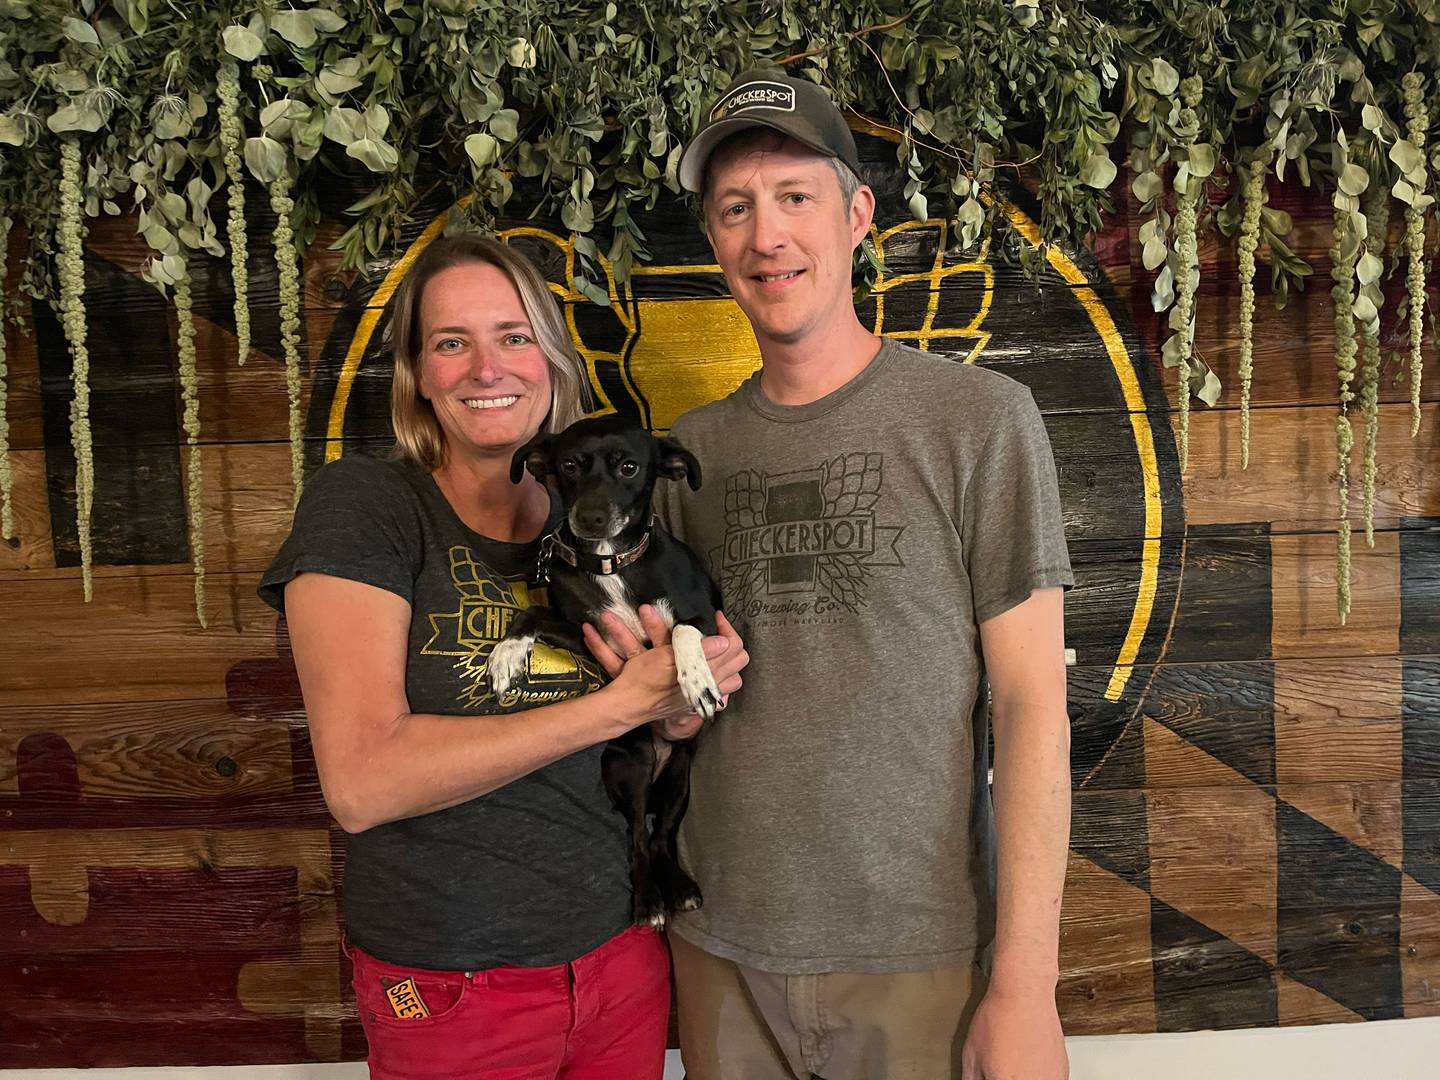 Checkerspot Brewing Company co-owners Judy and Rob Neff, and their dog, Dixie, in the taproom at Checkerspot.